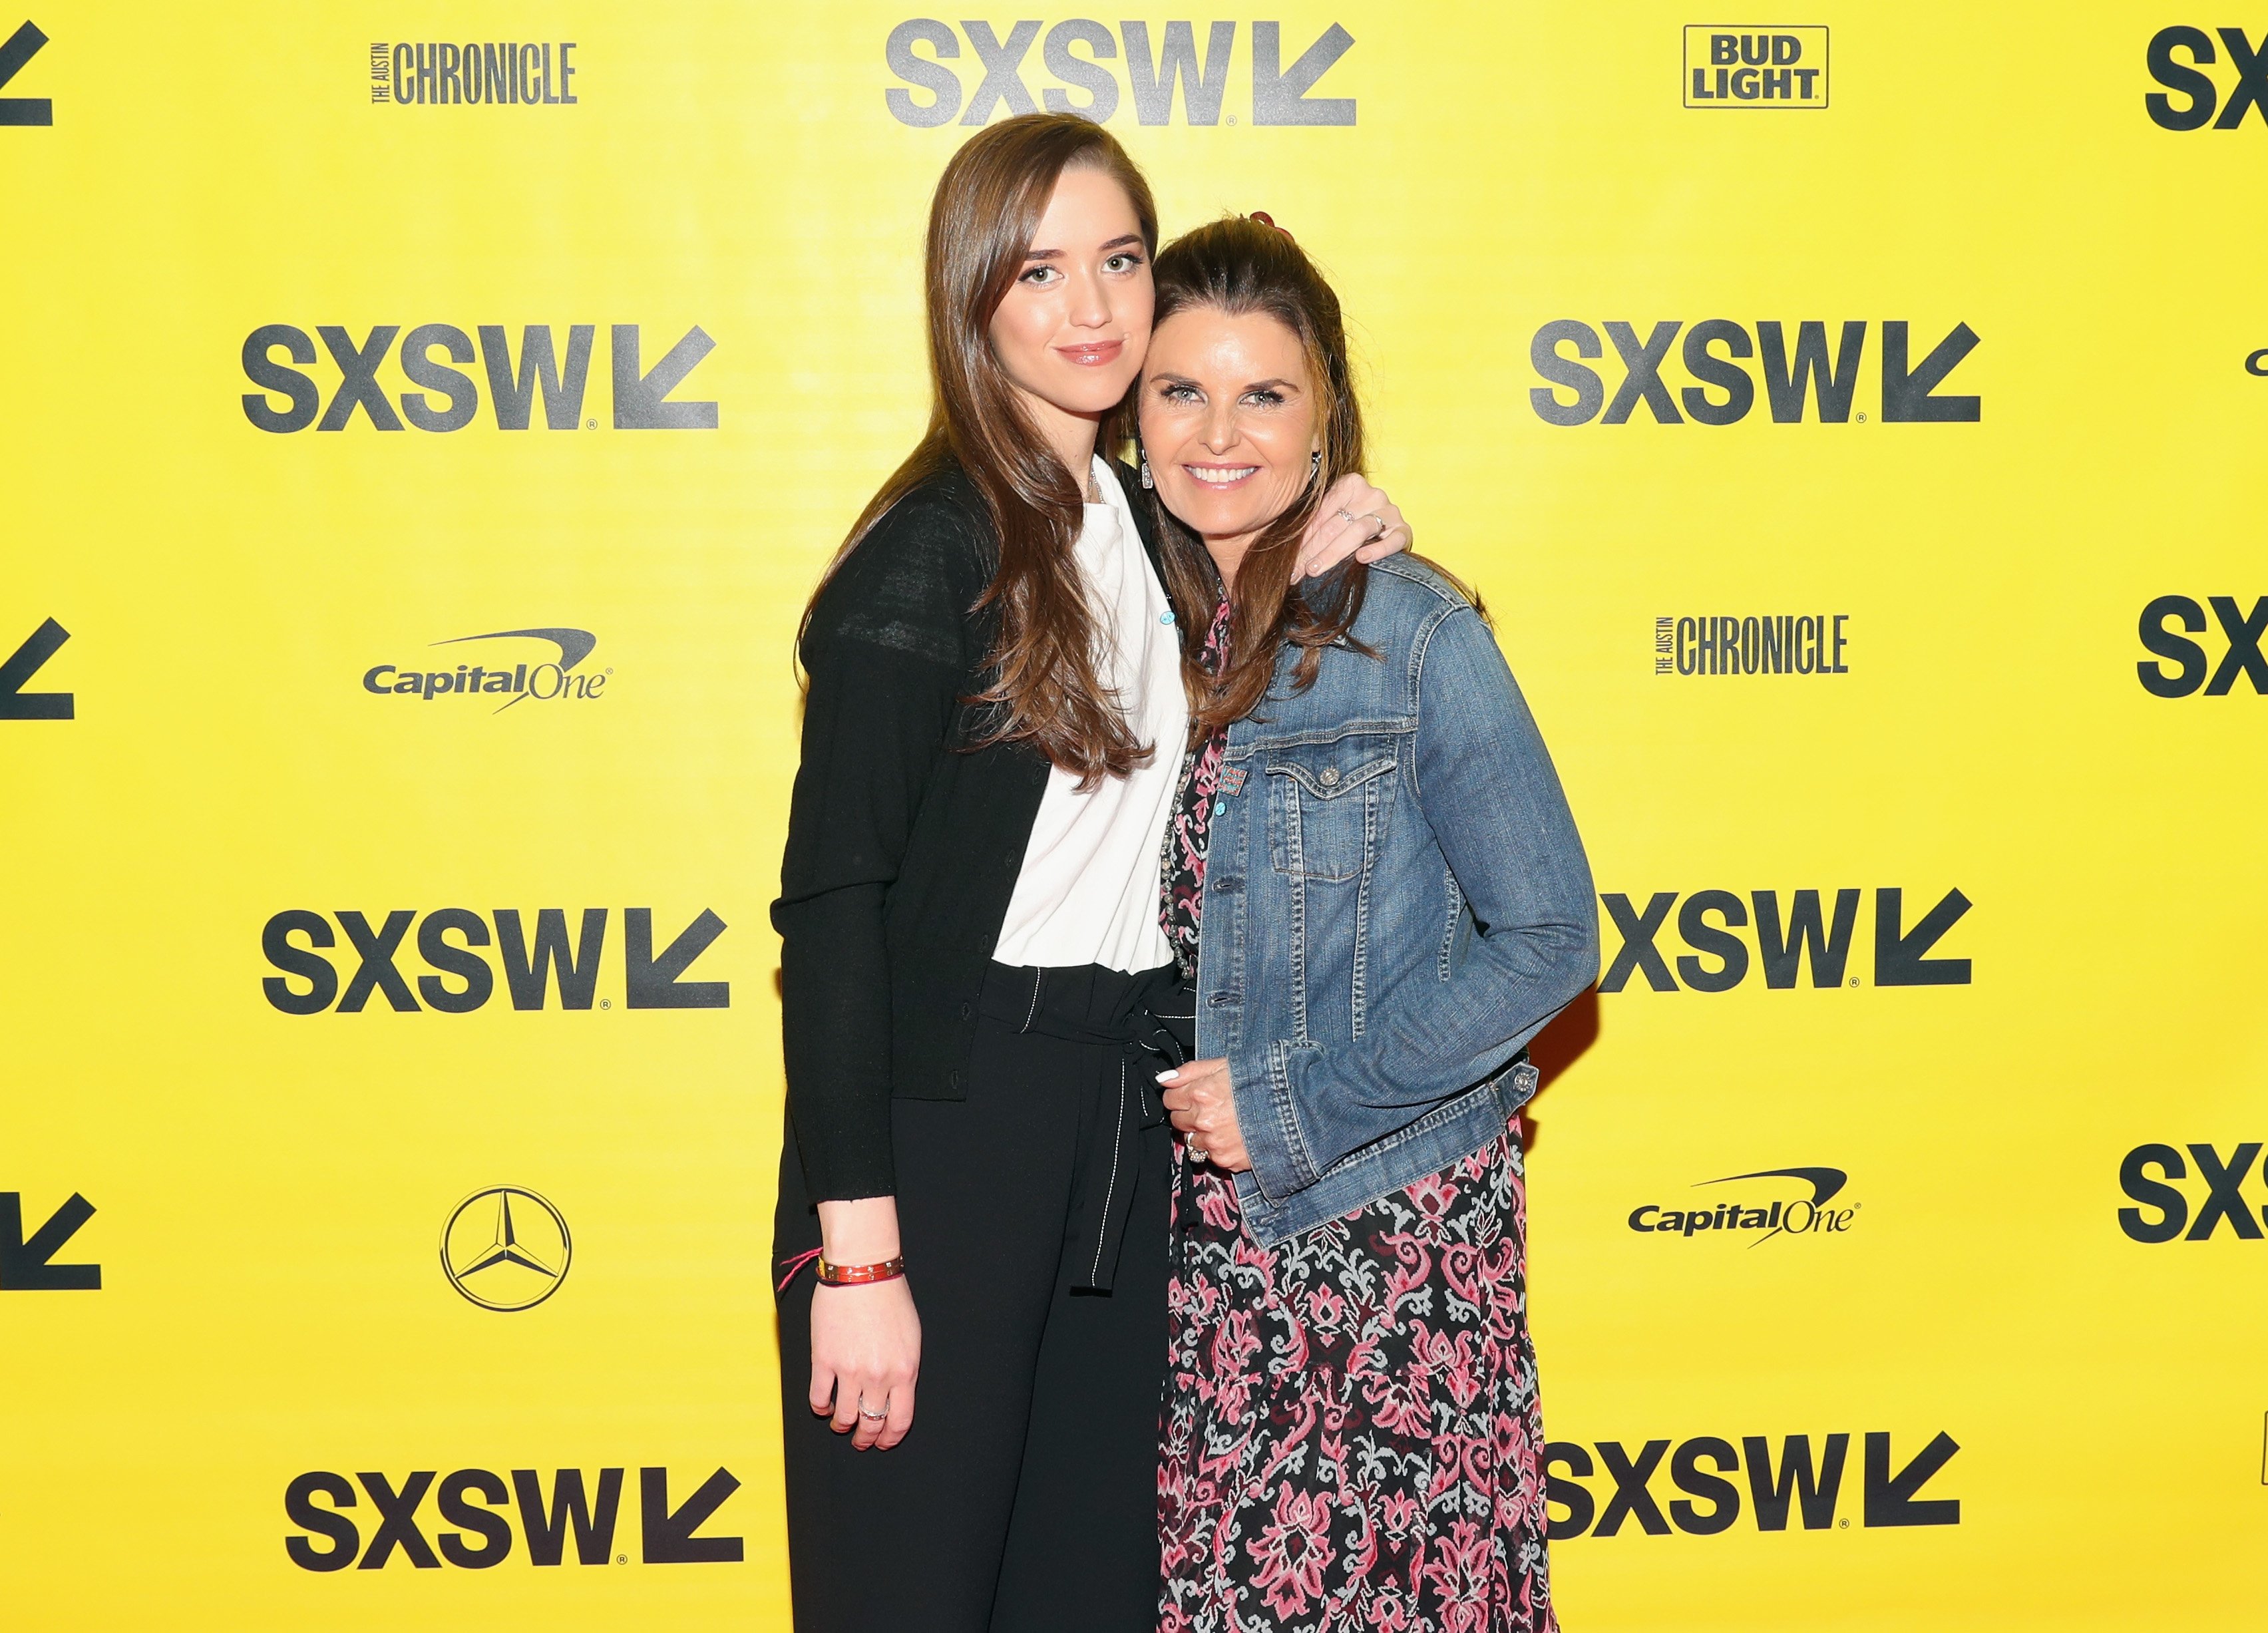 Christina Schwarzenegger and Maria Shriver at the "Take Your Pills" premiere during SXSW at Vimeo in Austin, Texas, on March 9, 2018. | Source: Getty Images